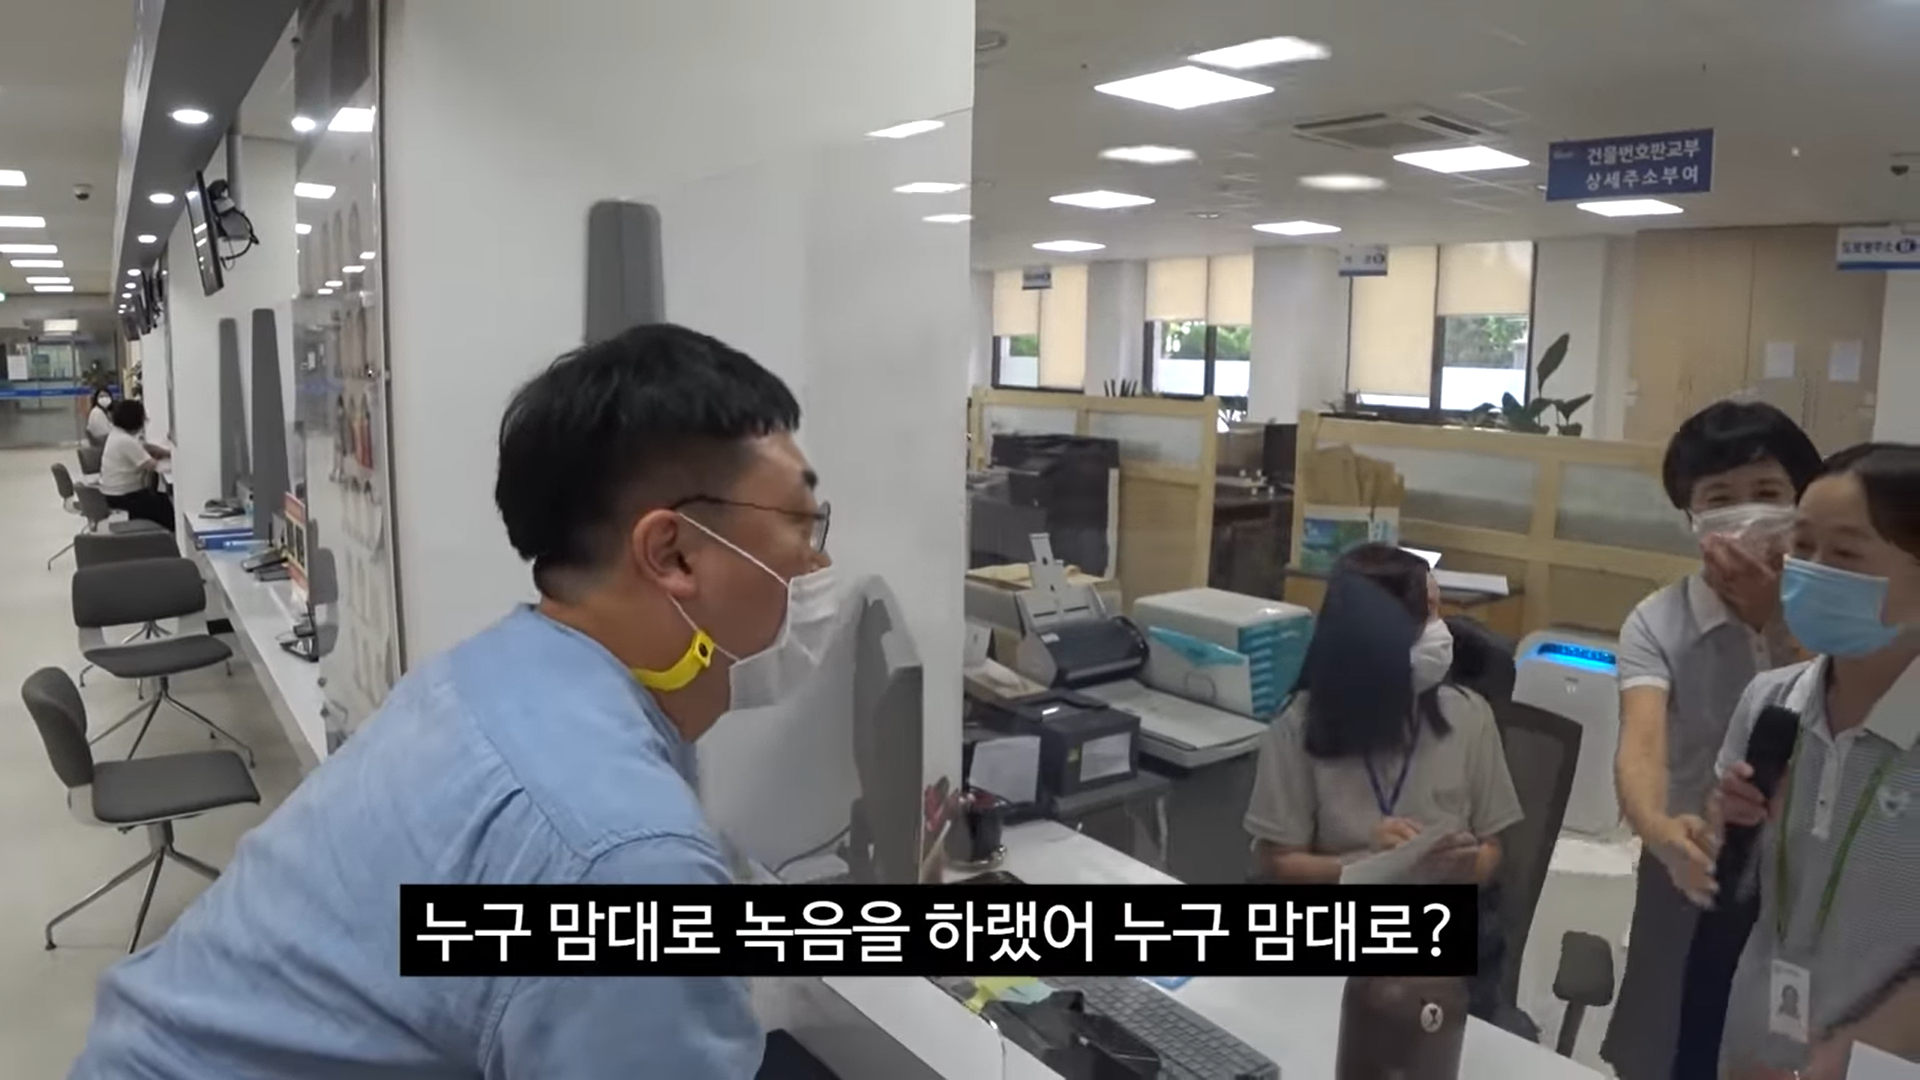 Youtube) The method acting of Chungju City officials